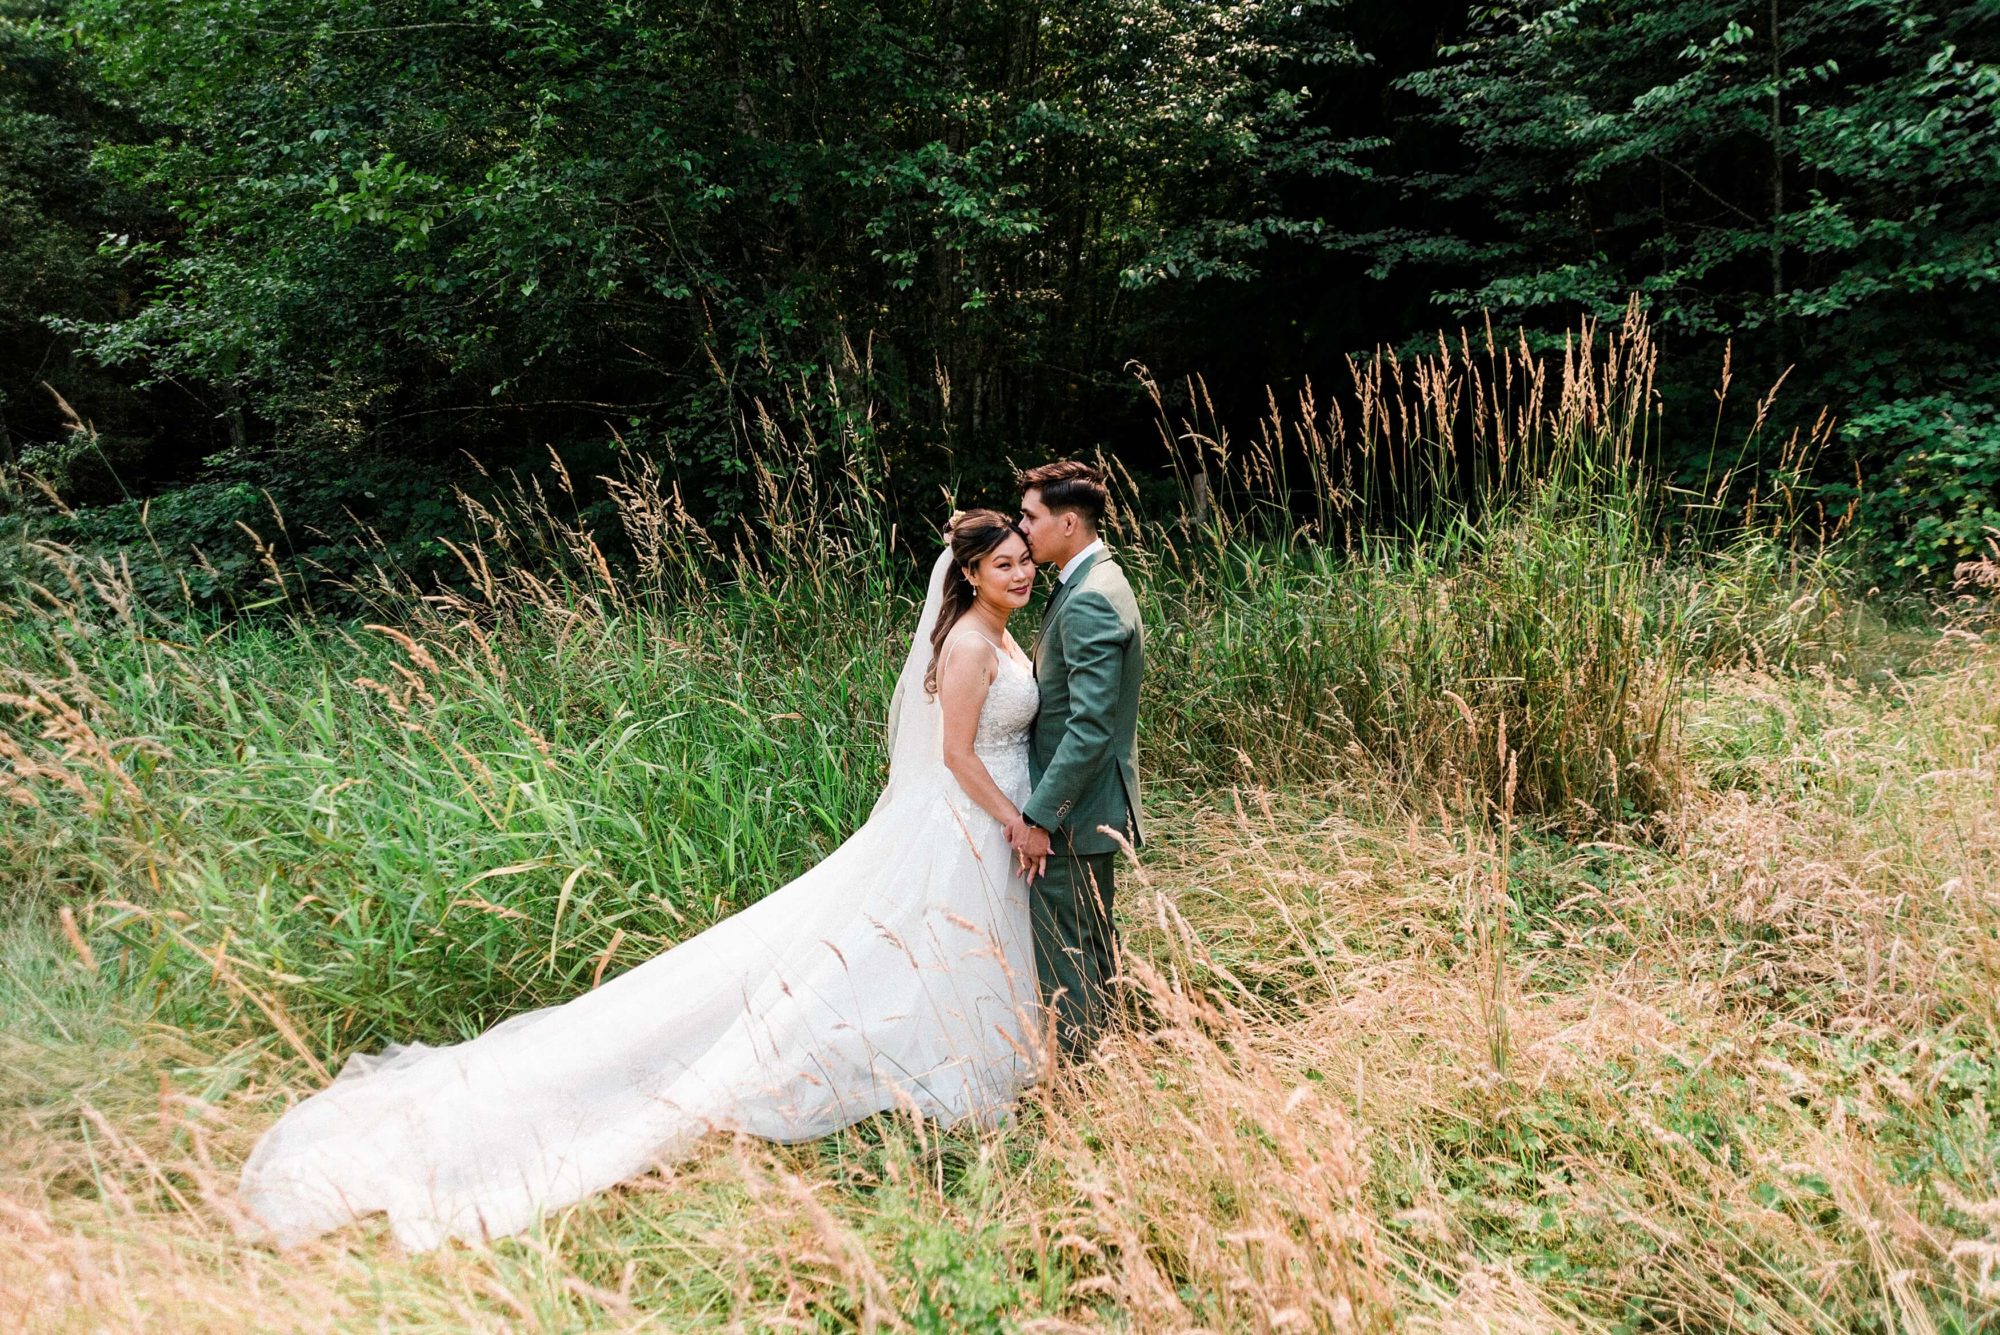 Bride and groom in a meadow at Misty Clover Farm Olympic Peninsula Wedding Venue